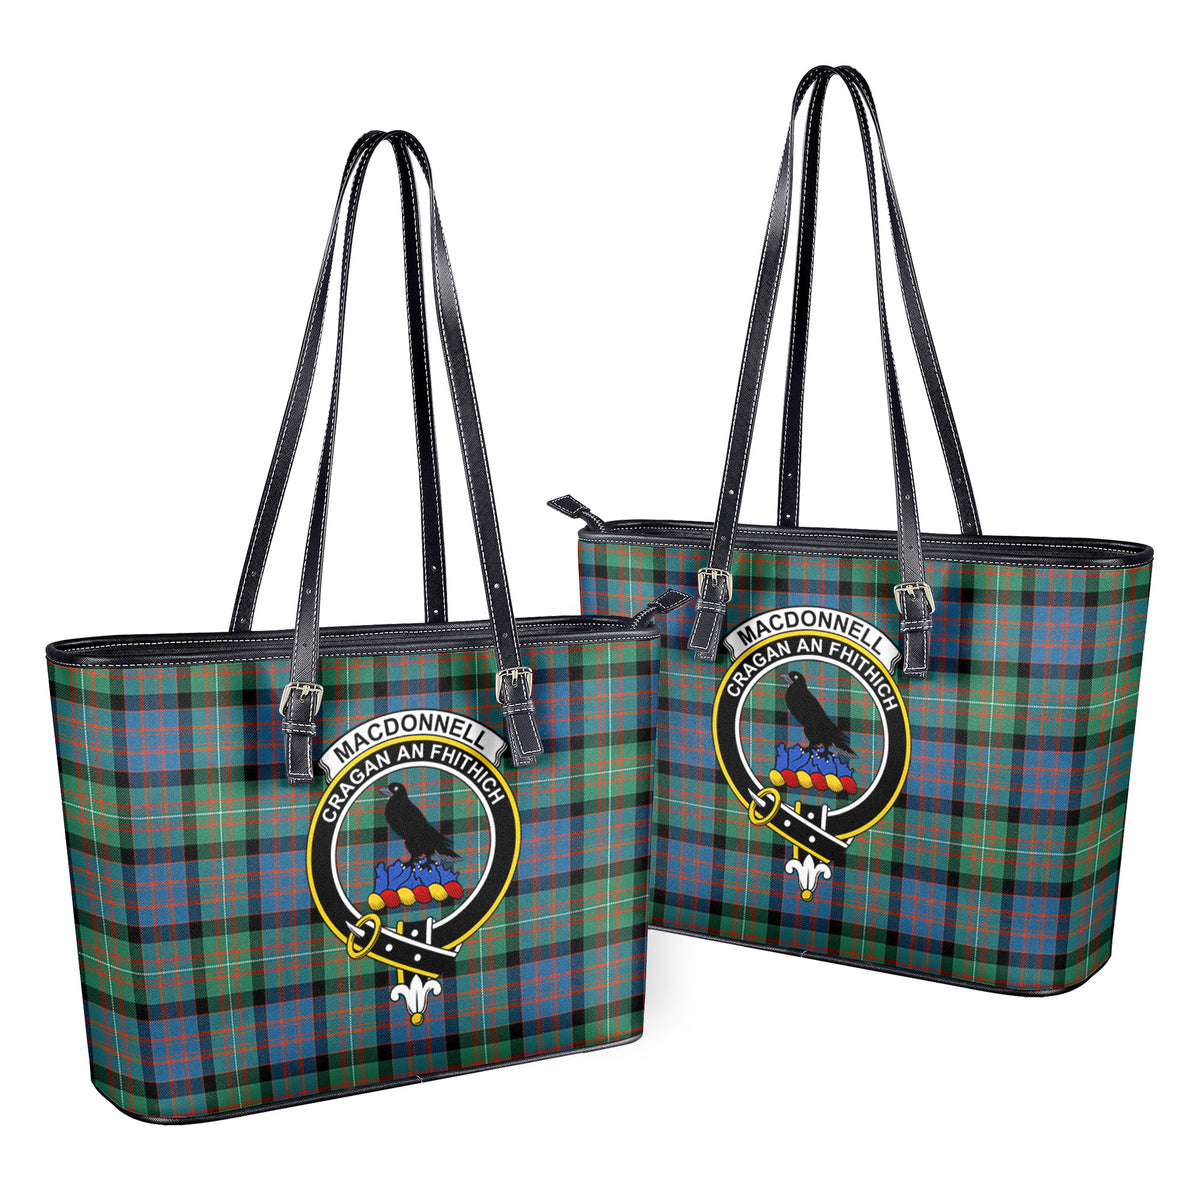 MacDonnell of Glengarry Ancient Tartan Crest Leather Tote Bag